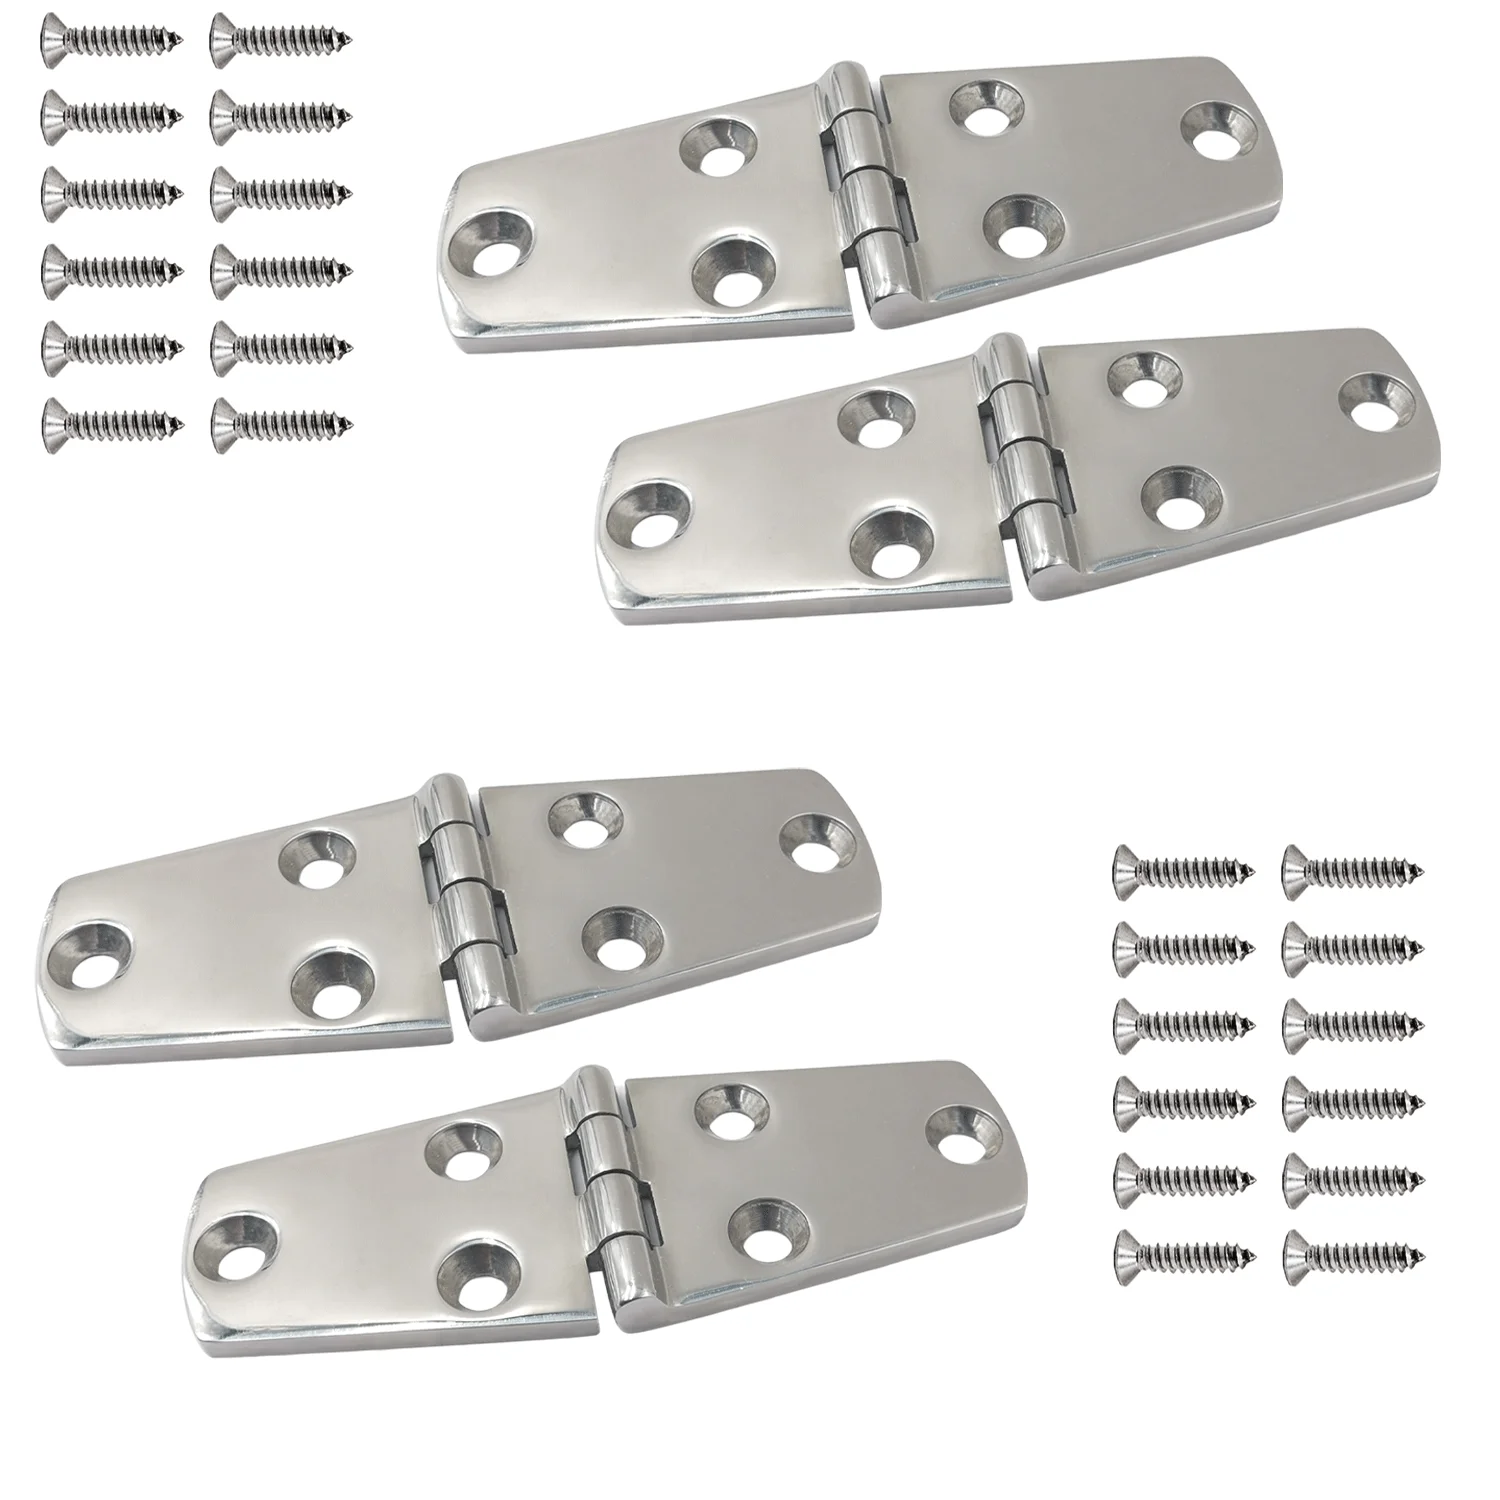 

4 Pcs 4" x 1.5"(102 x 38 mm) Boat Hatch Hinge Flush Mount Cabinet Butt Hinges Marine Stainless Steel 316 with Screws